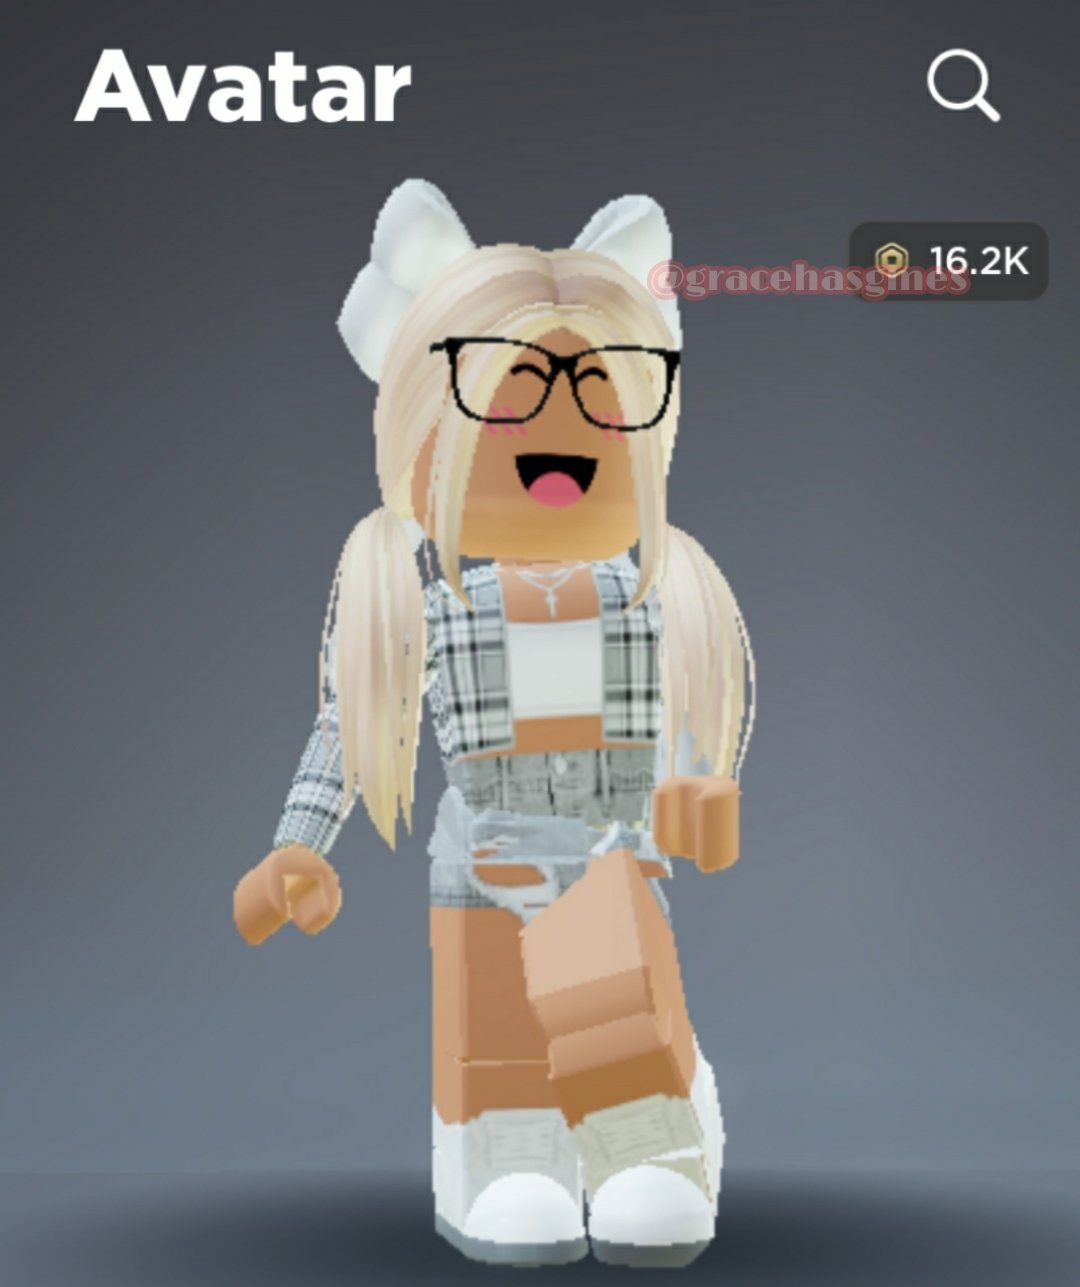 Aesthetic Roblox Avatar with NO ROBUX! 